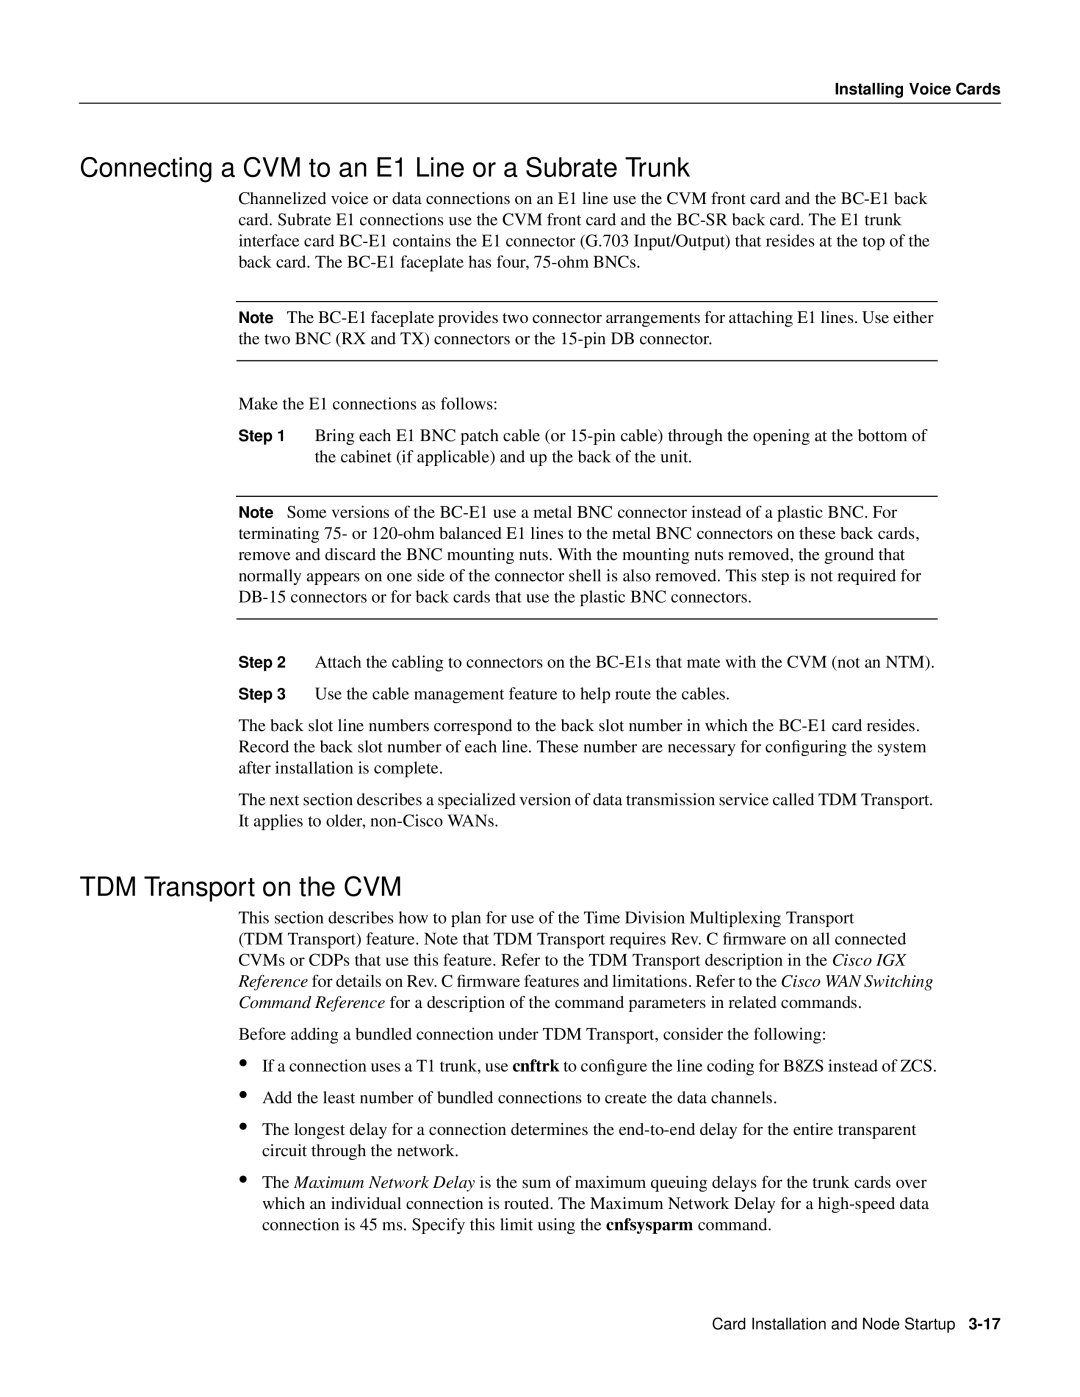 Cisco Systems IGX 8400 Series manual Connecting a CVM to an E1 Line or a Subrate Trunk, TDM Transport on the CVM 